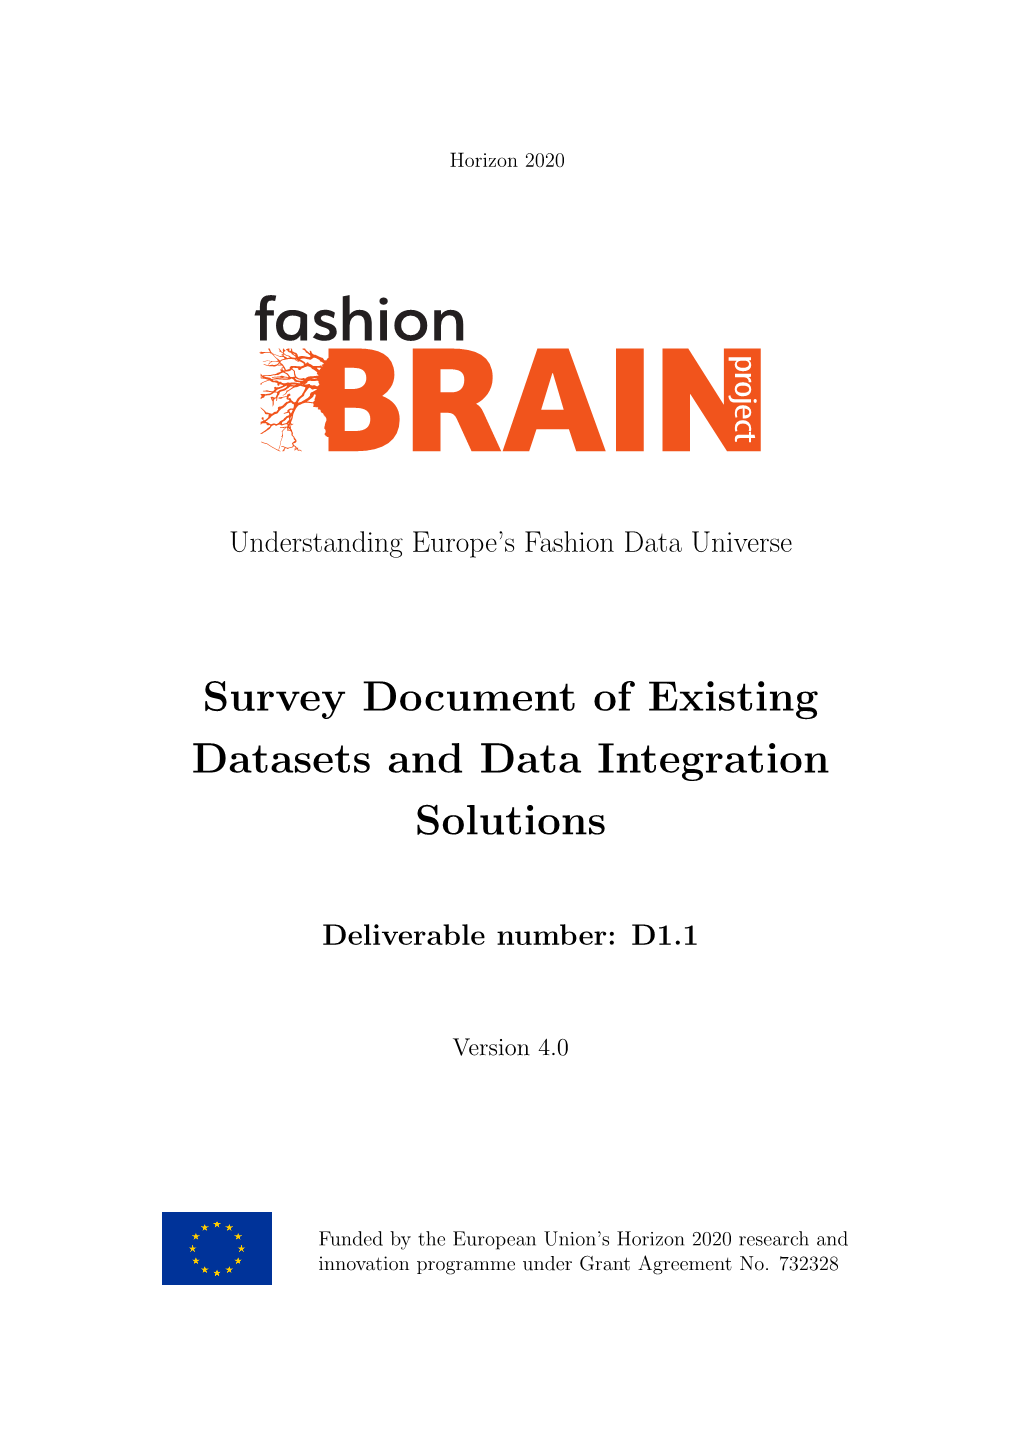 Survey Document of Existing Datasets and Data Integration Solutions